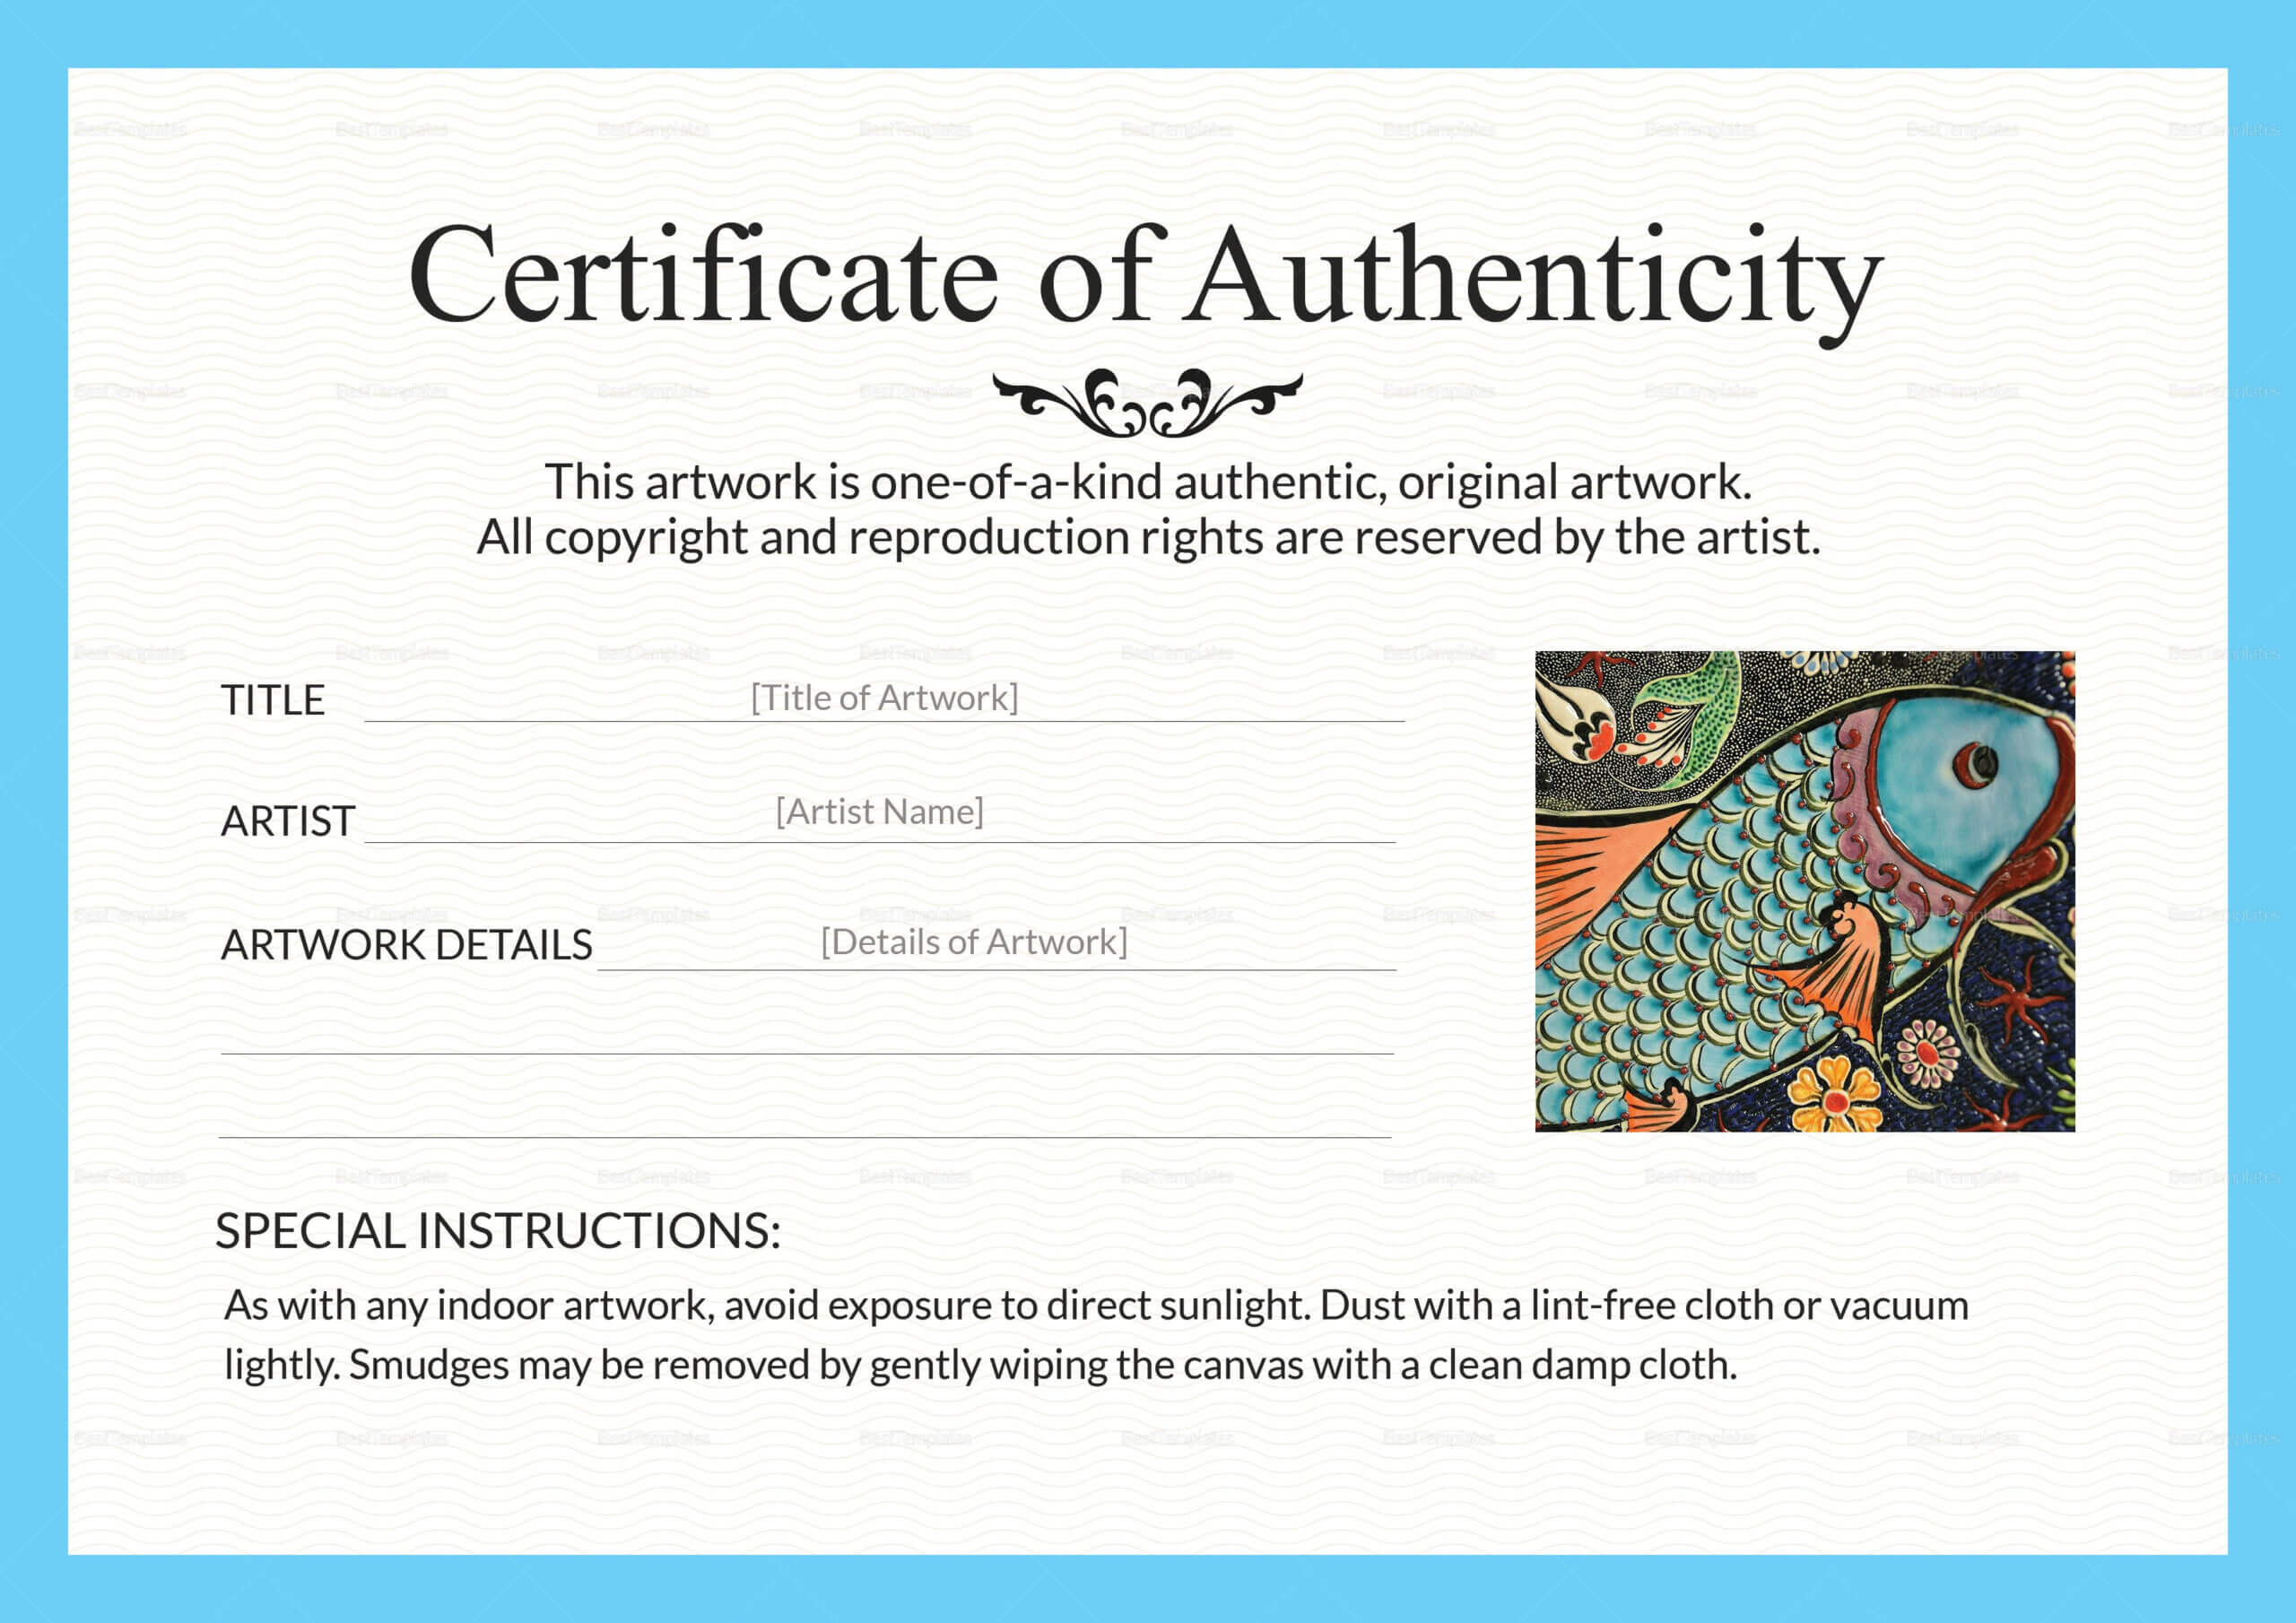 Certificate Of Authenticity Word Template Calep midnightpig co With 